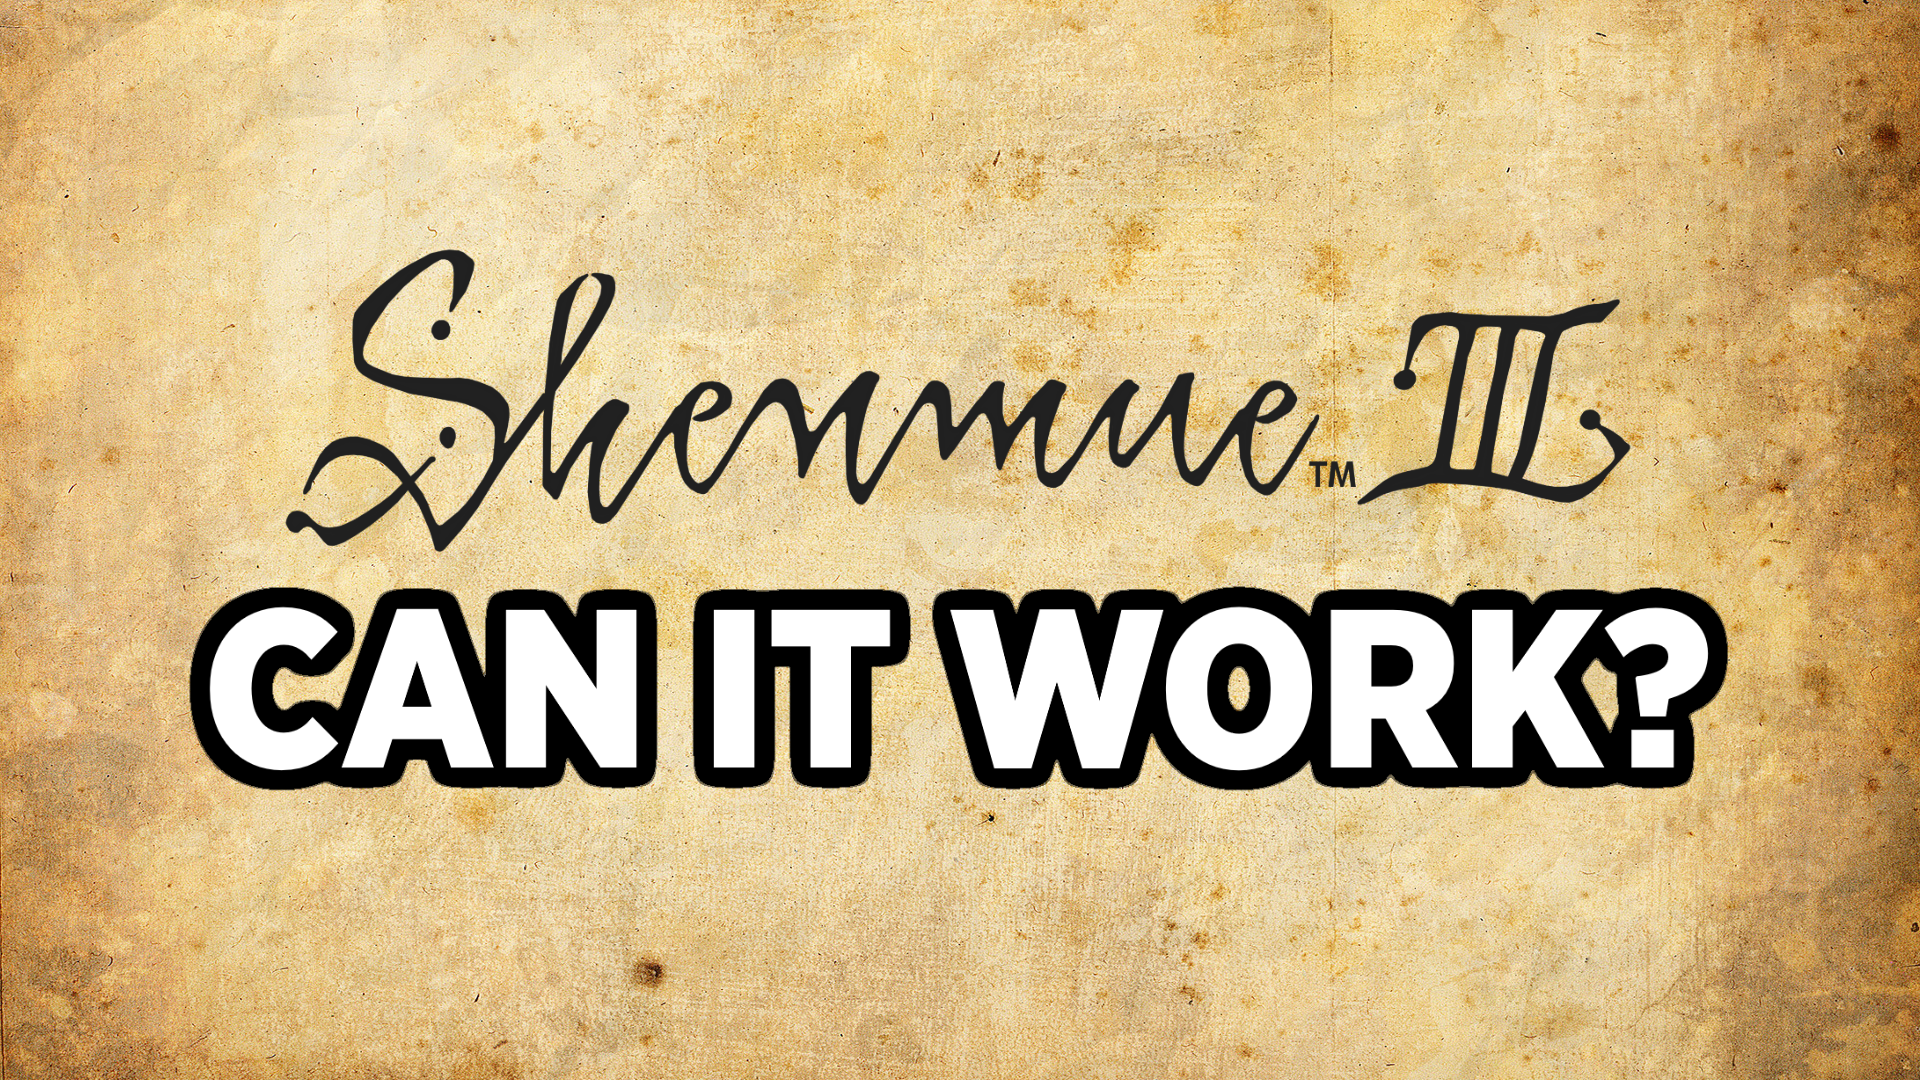 shenmue 3 can it work